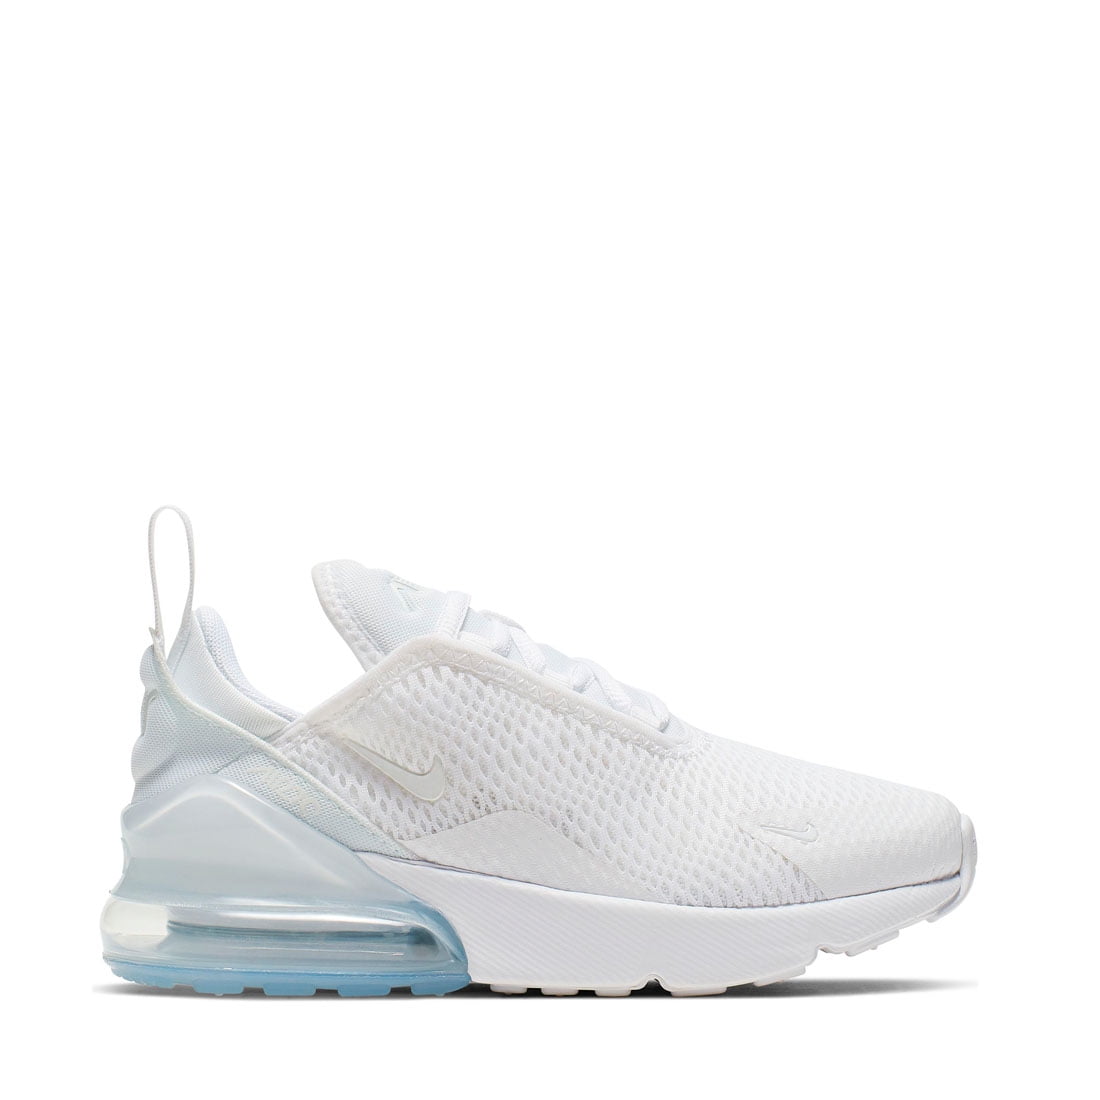 Elektricien weerstand bieden tafereel Nike Air Max 270-PS Unisex/Adult shoe size 2.5 Young Kids Casual AO2372-103  White/ White-Metallic Silver - Walmart.com